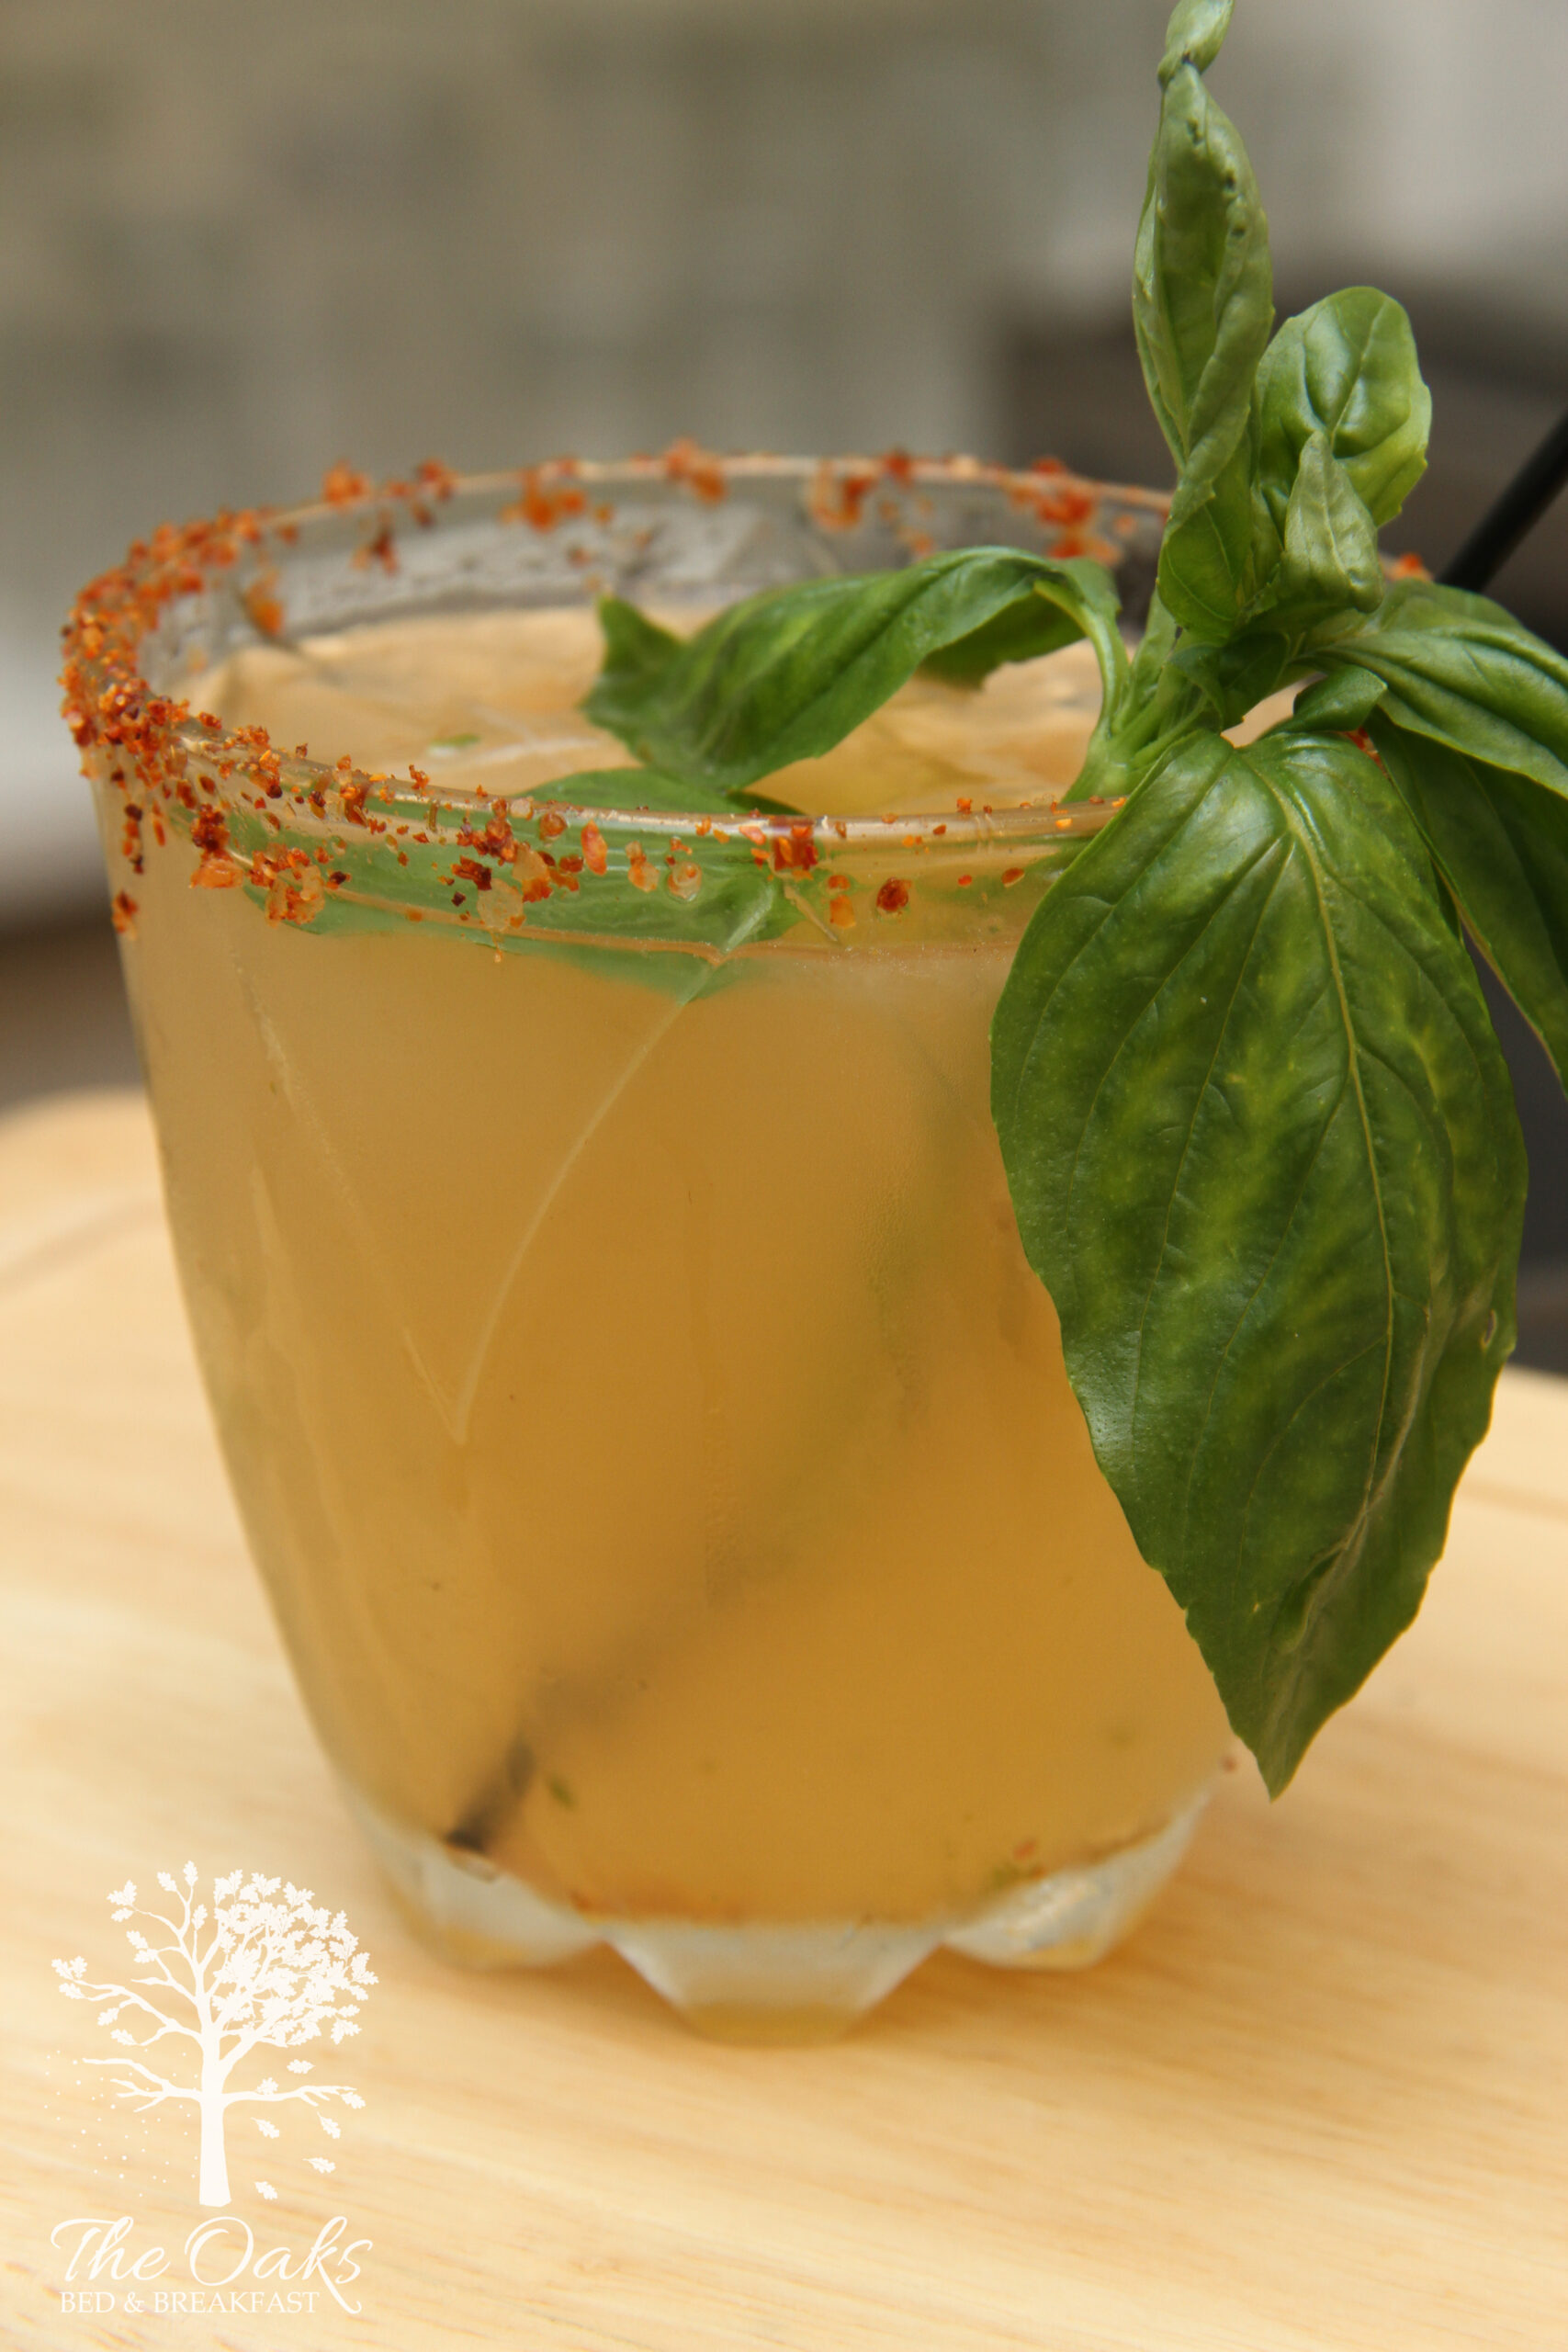 Life’s Flavors ~  Basil Citrus Gin By Allison Libby-Thesing